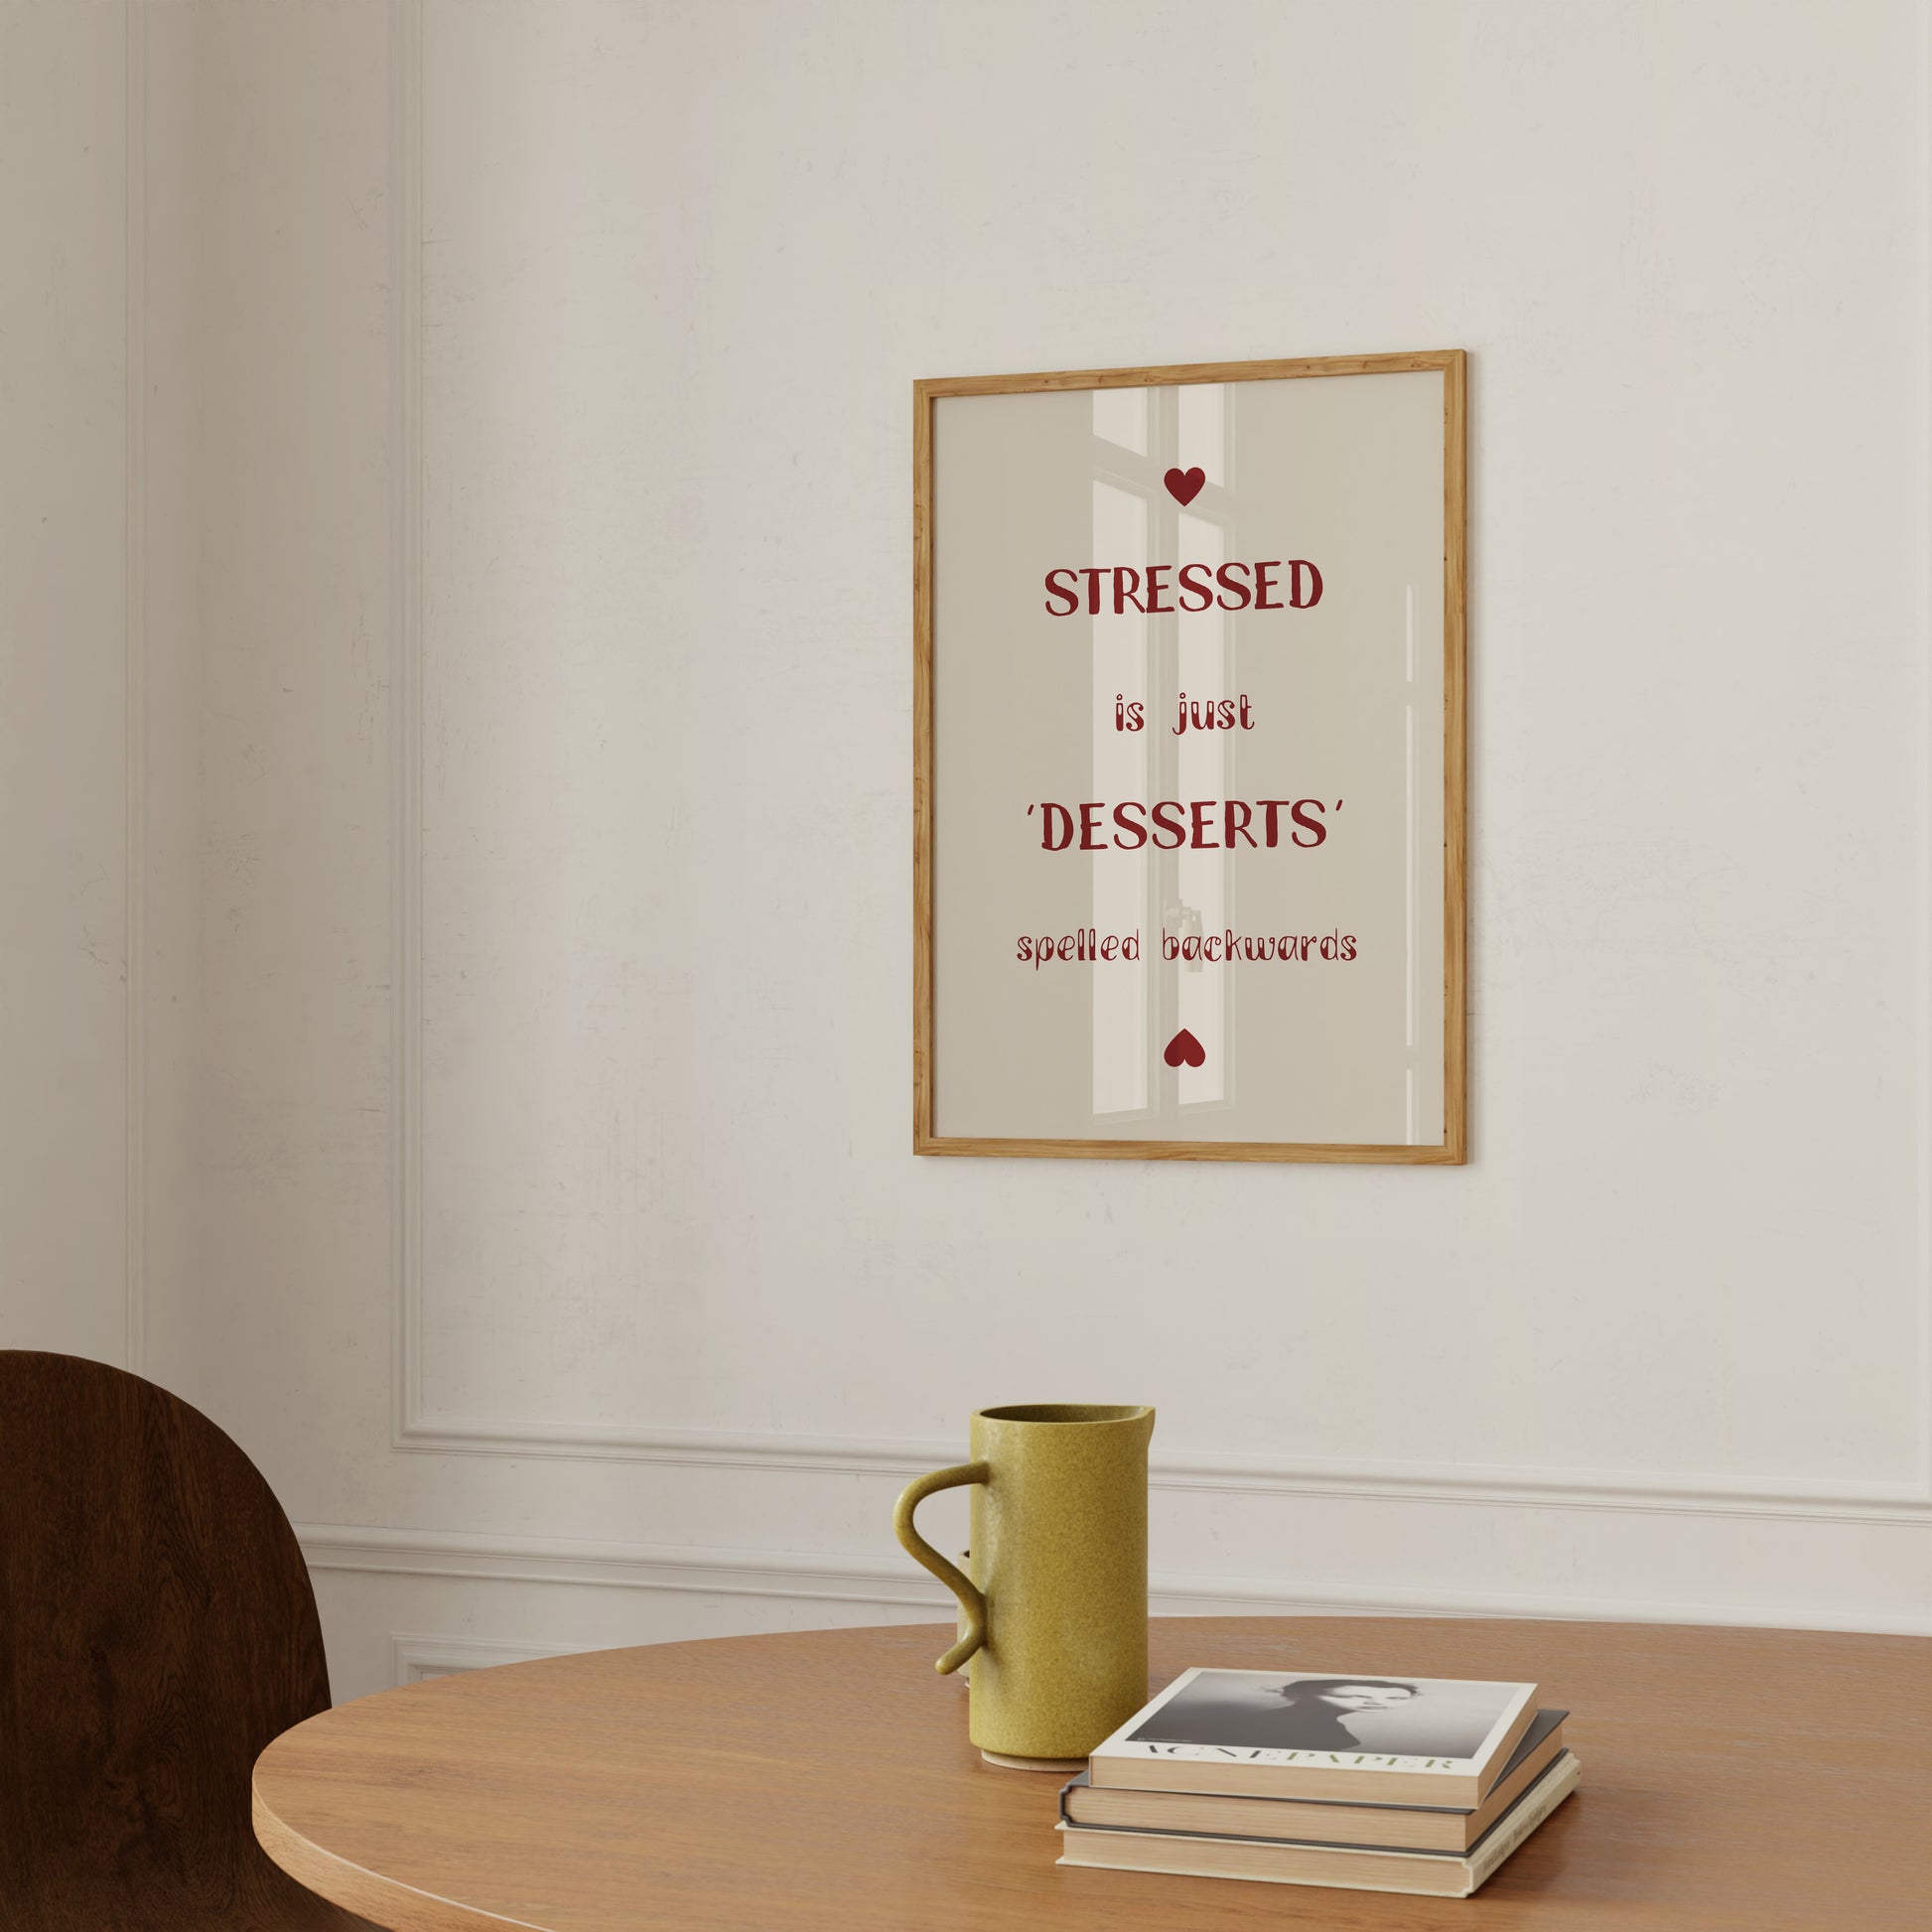 A framed quote on the wall that reads "stressed is just desserts spelled backwards," with a mug and book on a table.